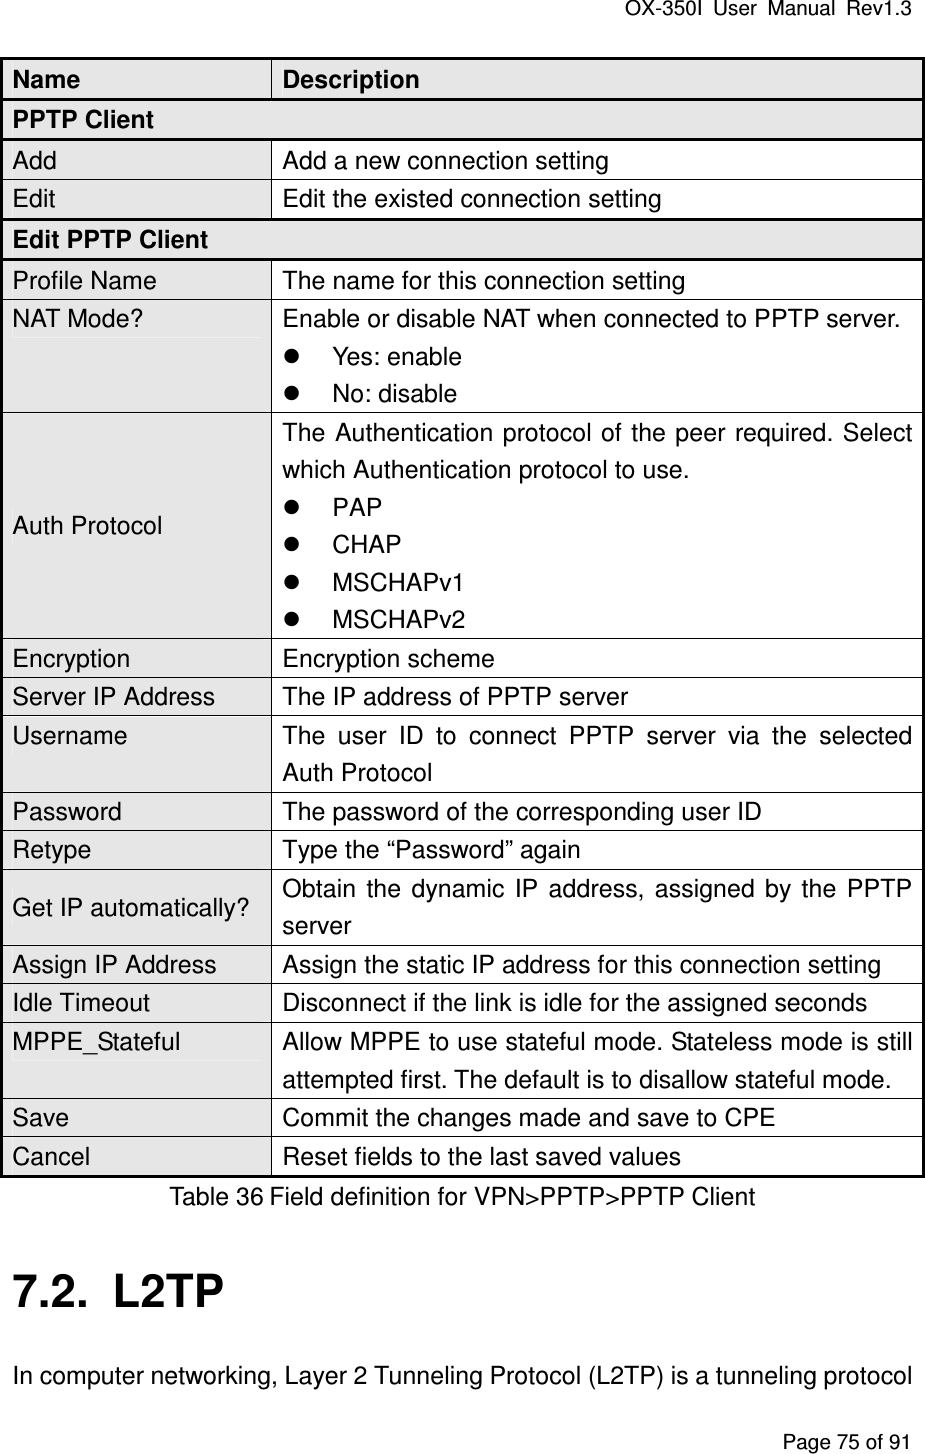 OX-350I  User  Manual  Rev1.3 Page 75 of 91 Name  Description PPTP Client Add  Add a new connection setting Edit  Edit the existed connection setting Edit PPTP Client Profile Name  The name for this connection setting NAT Mode?  Enable or disable NAT when connected to PPTP server.   Yes: enable   No: disable Auth Protocol The Authentication protocol of  the peer  required. Select which Authentication protocol to use.   PAP   CHAP   MSCHAPv1   MSCHAPv2 Encryption  Encryption scheme Server IP Address  The IP address of PPTP server Username  The  user  ID  to  connect  PPTP  server  via  the  selected Auth Protocol Password  The password of the corresponding user ID Retype  Type the “Password” again Get IP automatically?  Obtain  the  dynamic  IP  address,  assigned  by  the  PPTP server Assign IP Address  Assign the static IP address for this connection setting Idle Timeout  Disconnect if the link is idle for the assigned seconds MPPE_Stateful  Allow MPPE to use stateful mode. Stateless mode is still attempted first. The default is to disallow stateful mode. Save  Commit the changes made and save to CPE Cancel  Reset fields to the last saved values Table 36 Field definition for VPN&gt;PPTP&gt;PPTP Client 7.2.  L2TP In computer networking, Layer 2 Tunneling Protocol (L2TP) is a tunneling protocol 